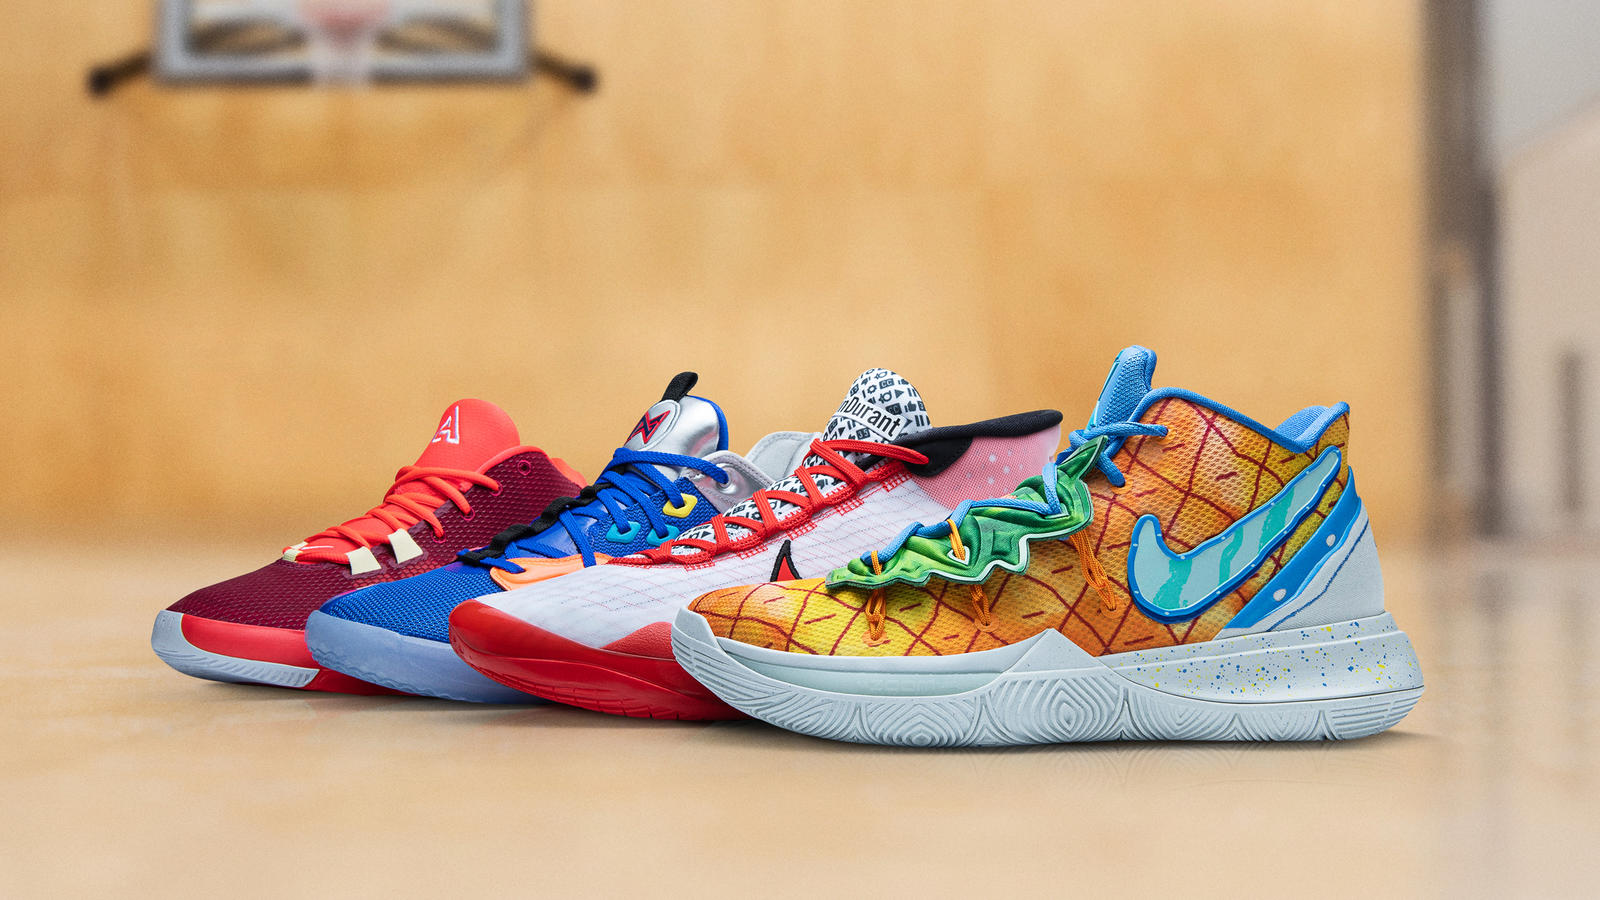 SpongeBob Squarepants and Nike Kyrie Collection Restocks Today The Presentation